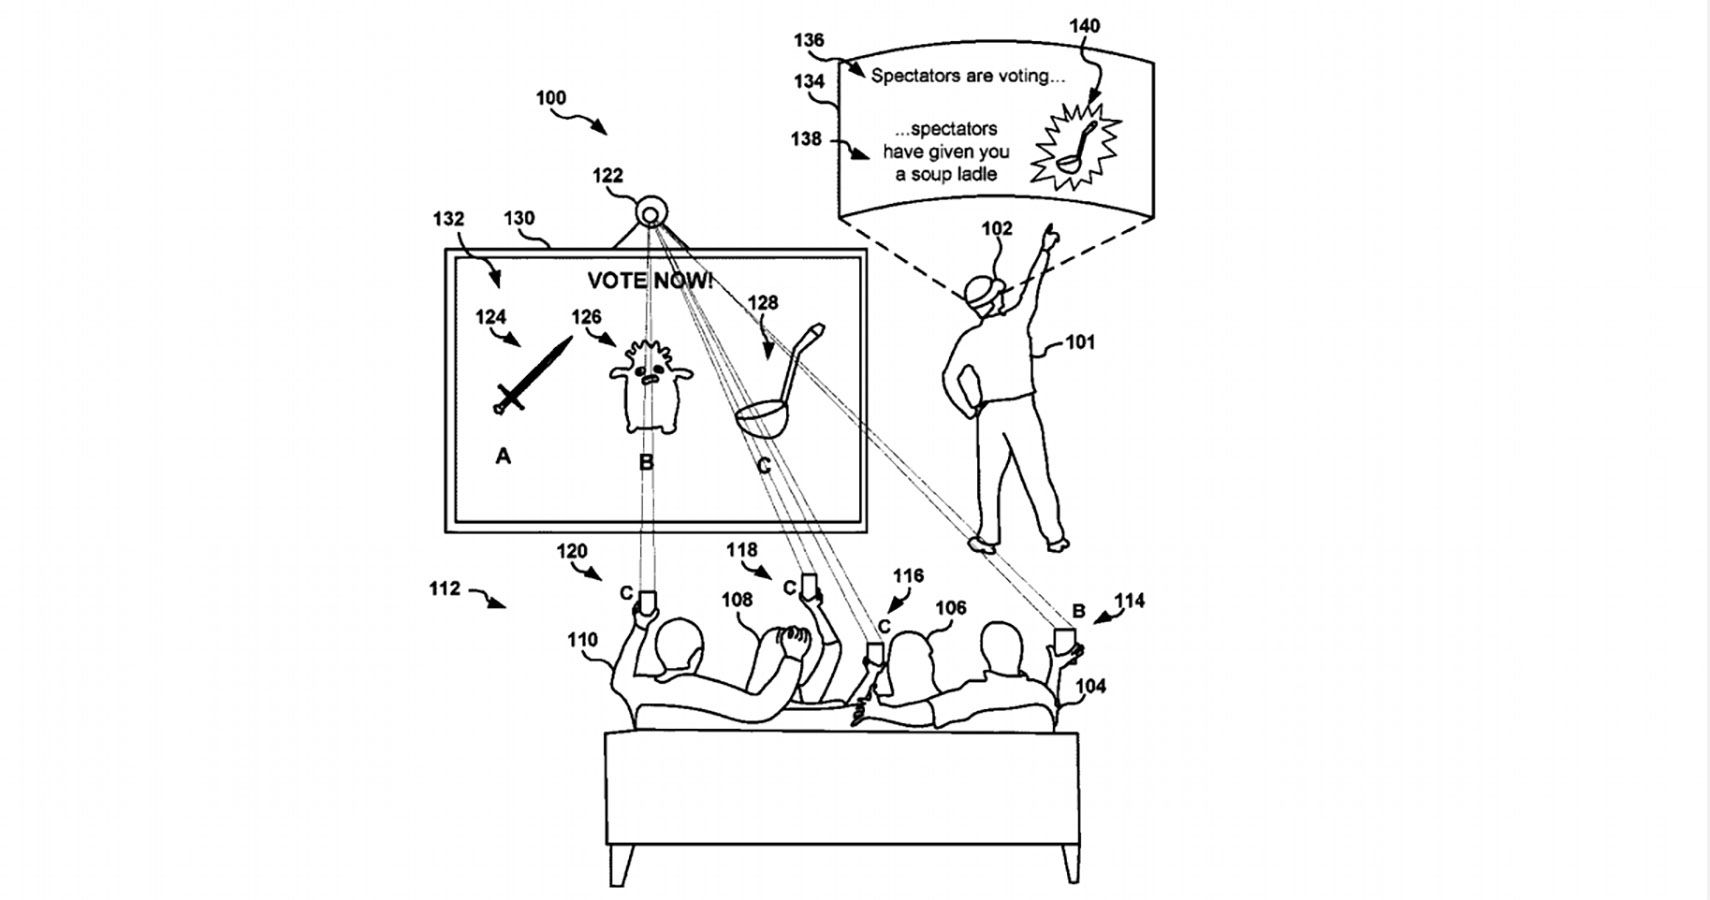 An illustration of how a recently published PSVR patent would work.